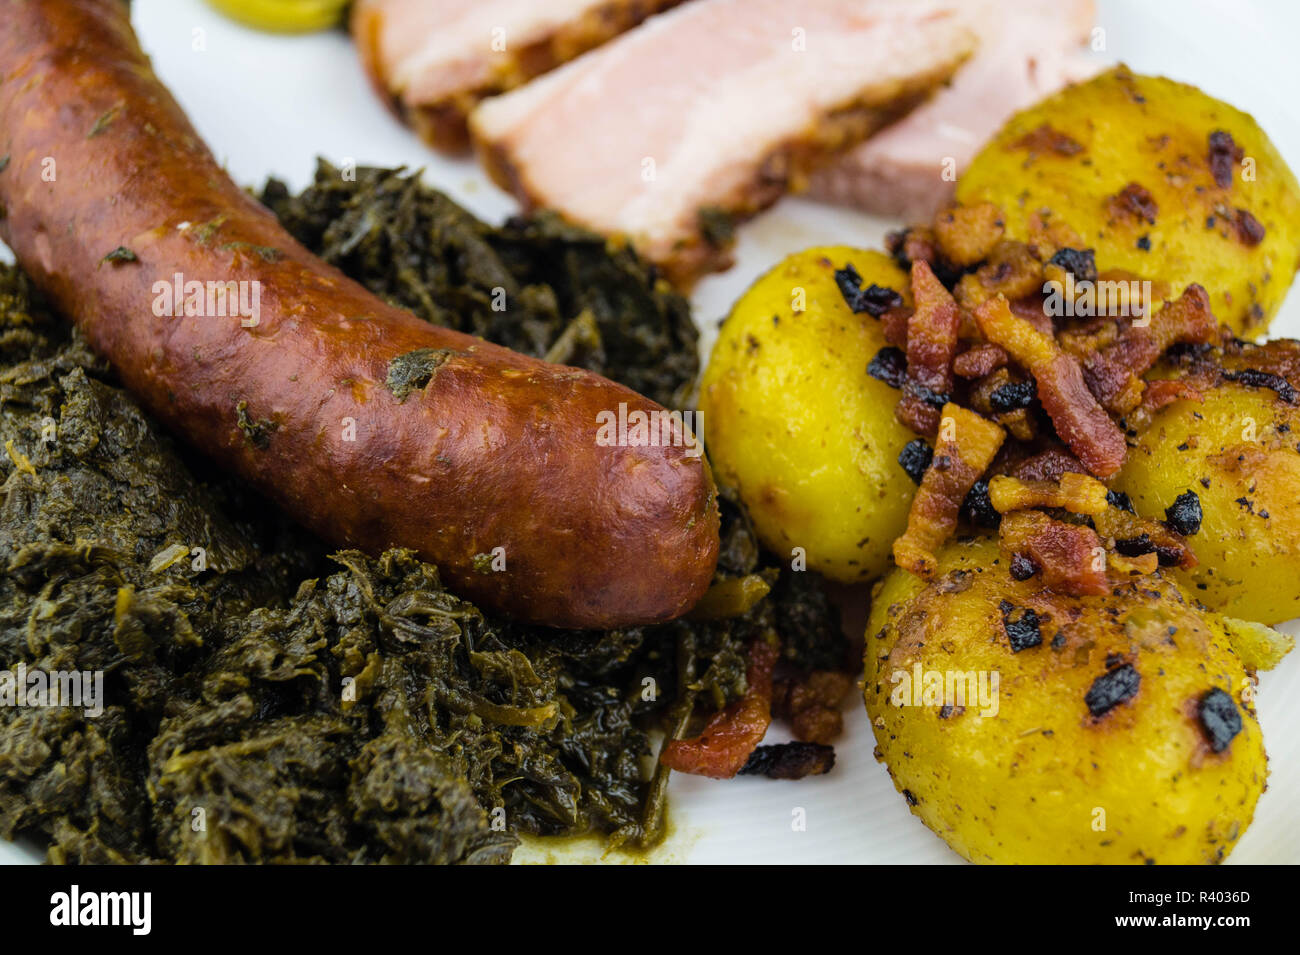 traditional northern german Food curly Kale with pork Bacon and sausages Stock Photo